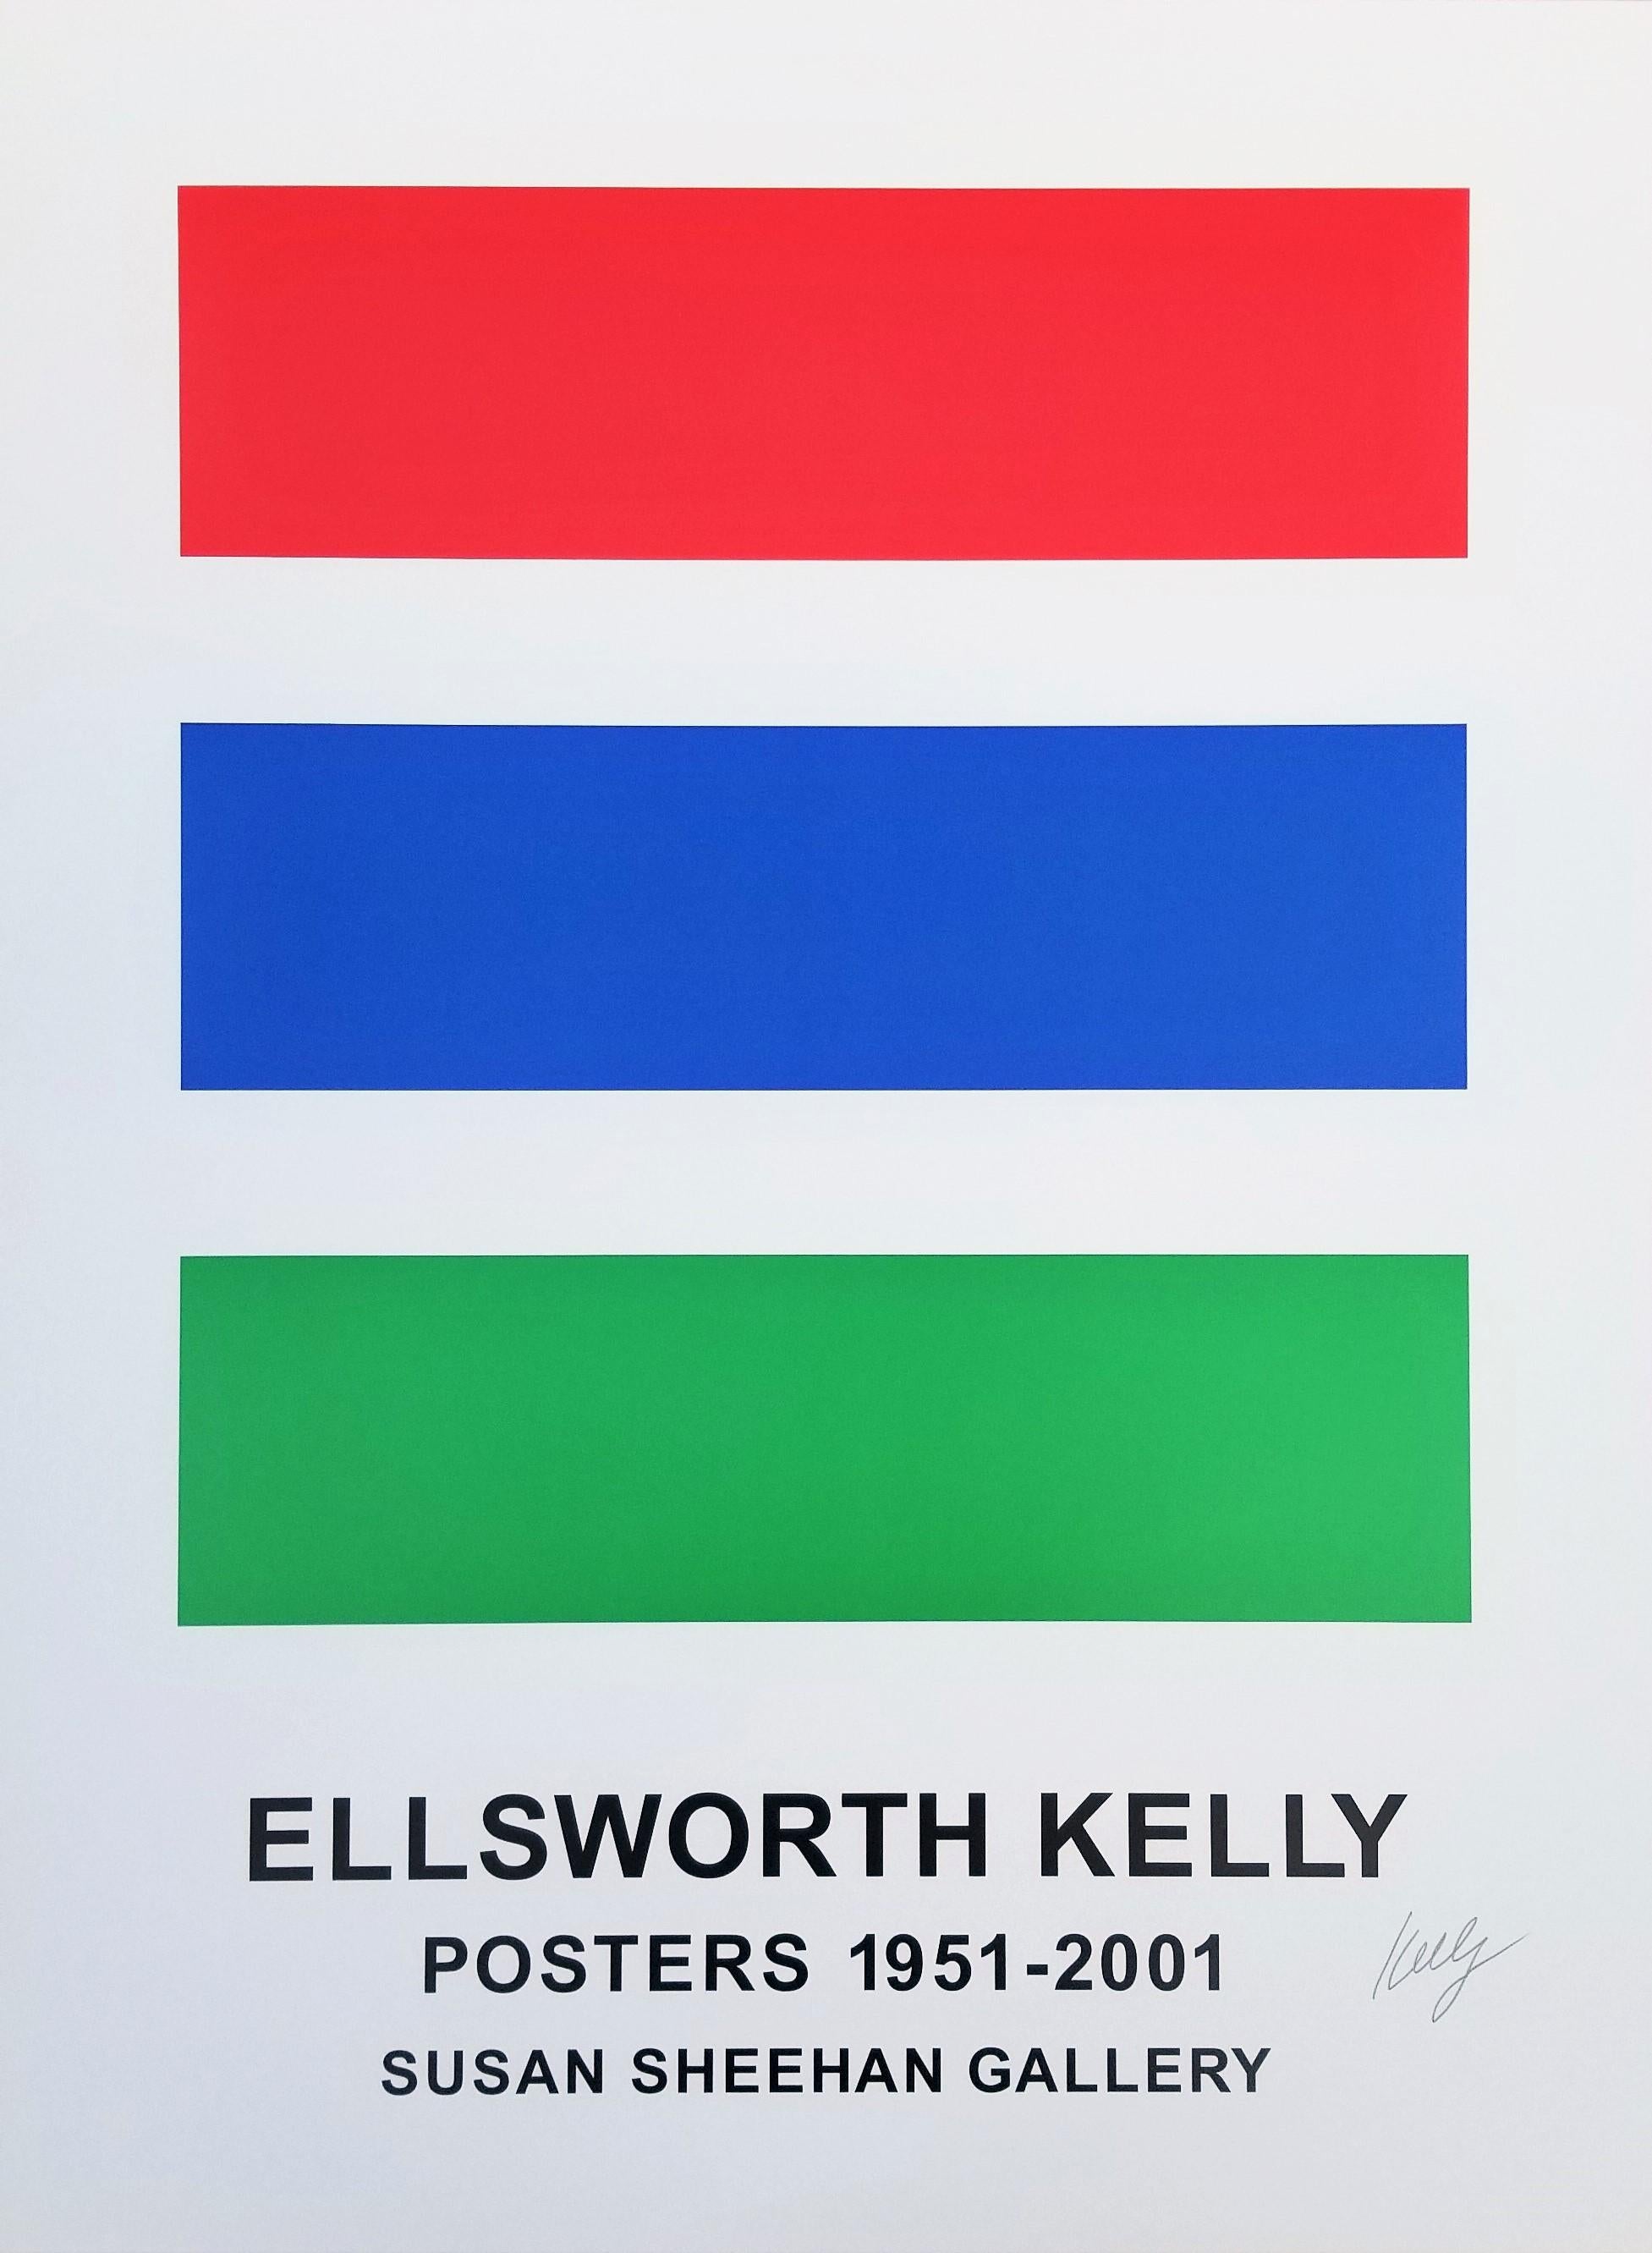 Artist: Ellsworth Kelly (American, 1923-2015)
Title: "Susan Sheehan Gallery (Ellsworth Kelly Posters 1951-2001)"
*Signed by Kelly in pencil lower right
Year: 2001
Medium: Original Lithograph, Exhibition Poster on heavy smooth wove paper
Limited